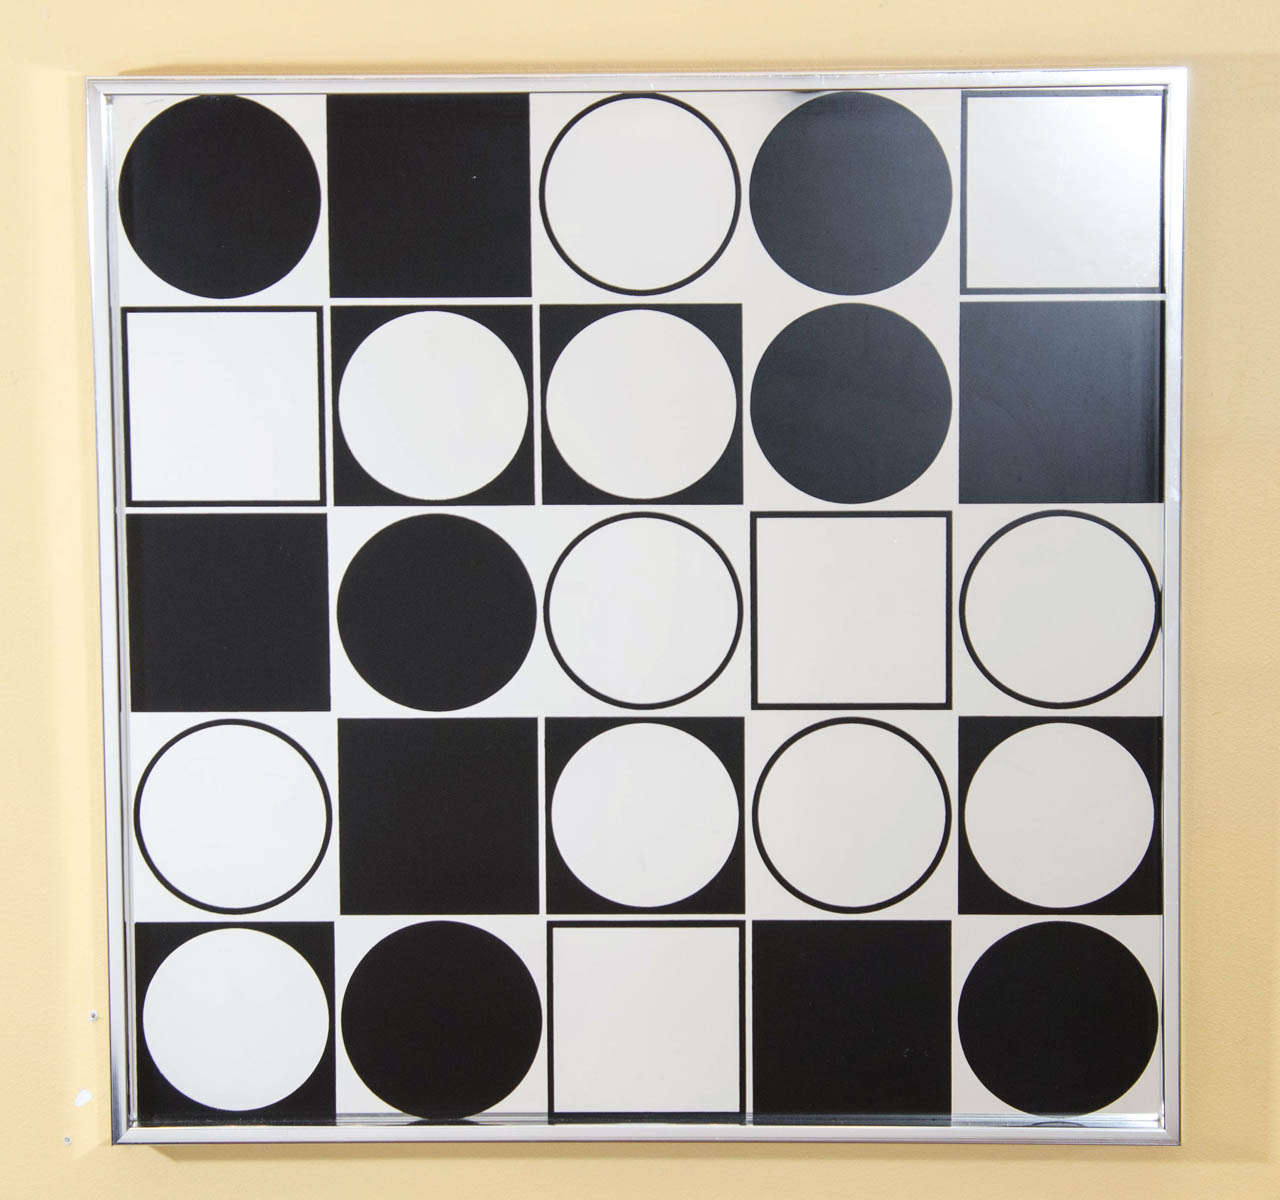 A fun accent wall decoration or mirror with applied black graphics. Mirror can be mounted squared or diagonally. Please contact for location. 